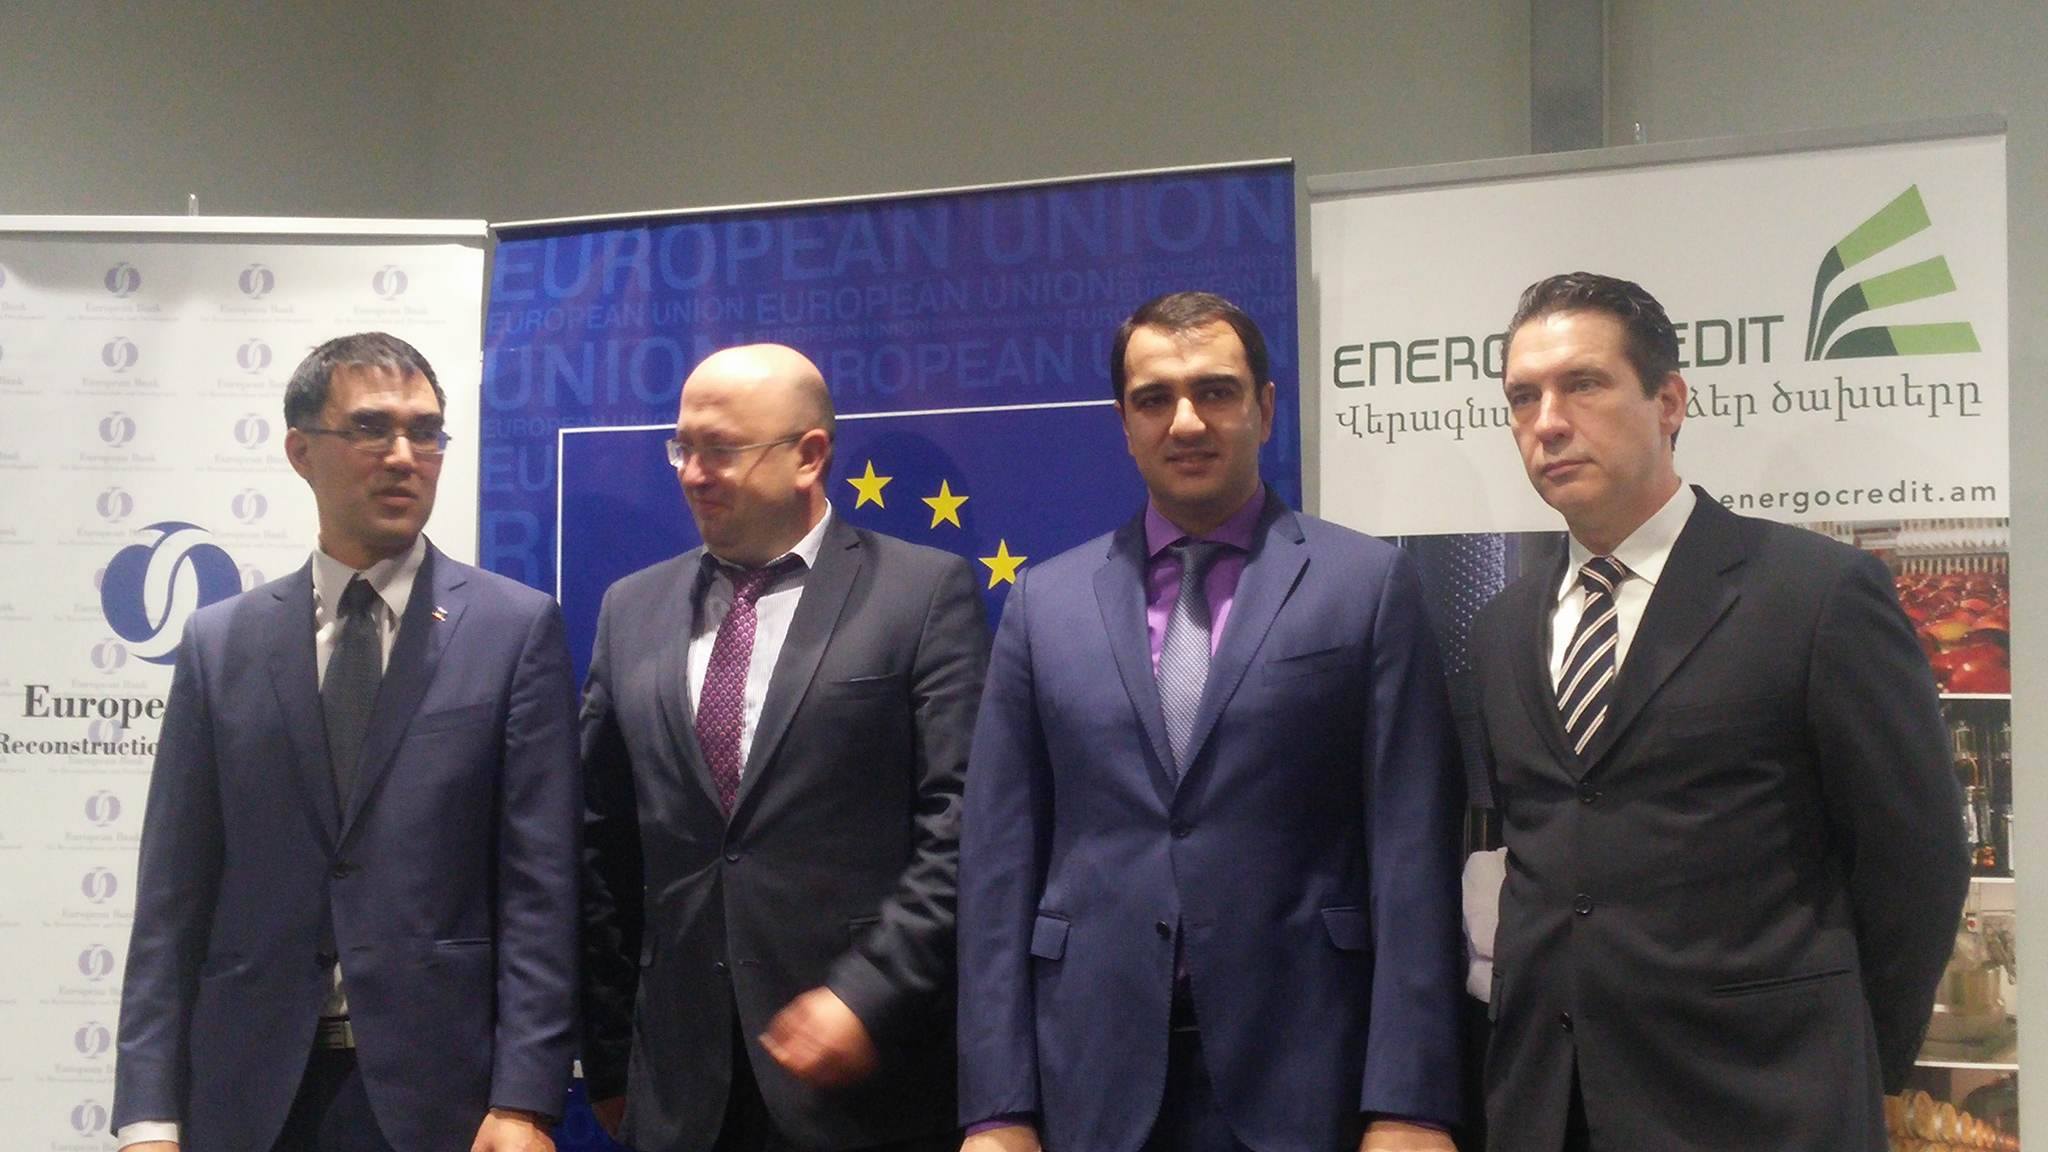 Energy efficient investment opportunities in Armenia discussed in Yerevan as part of EBRD`s Energocredit Programme